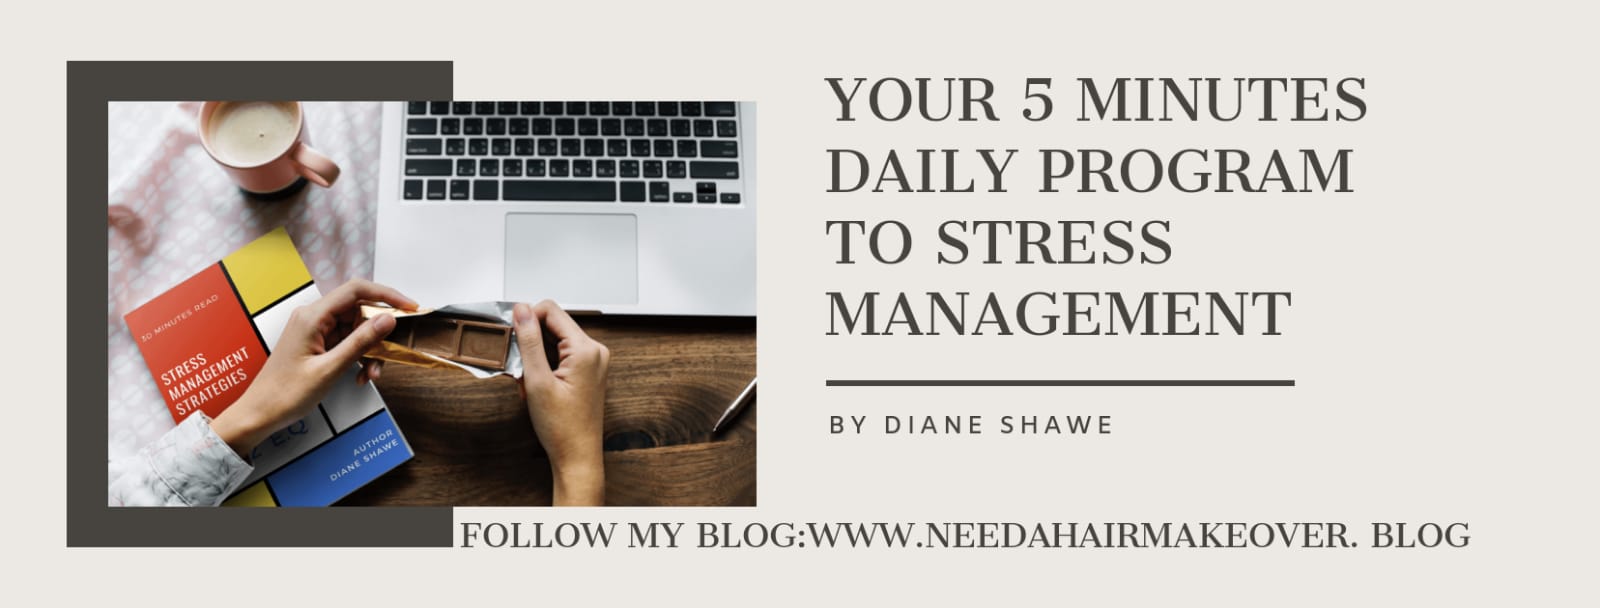 Your 5 Minutes Daily Program to Stress Management by Diane Shawe